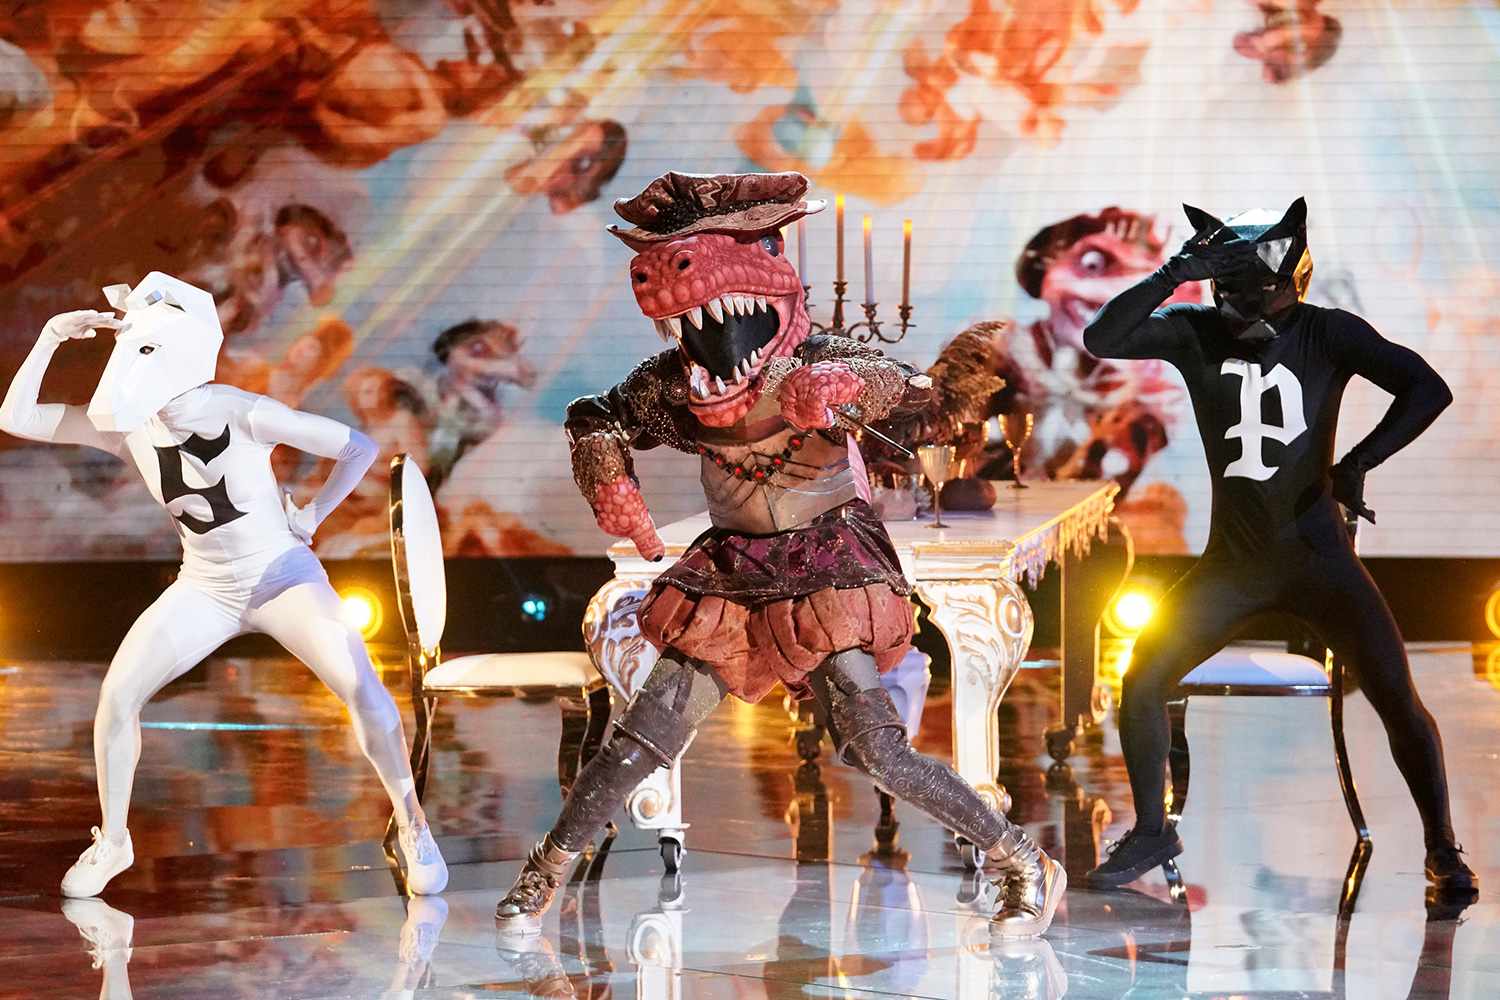 The Masked Singer: T-Rex in the &ldquo;It Never Hurts to Mask: Group C Playoffs&rdquo; episode of THE MASKED SINGER airing Wednesday, March 18